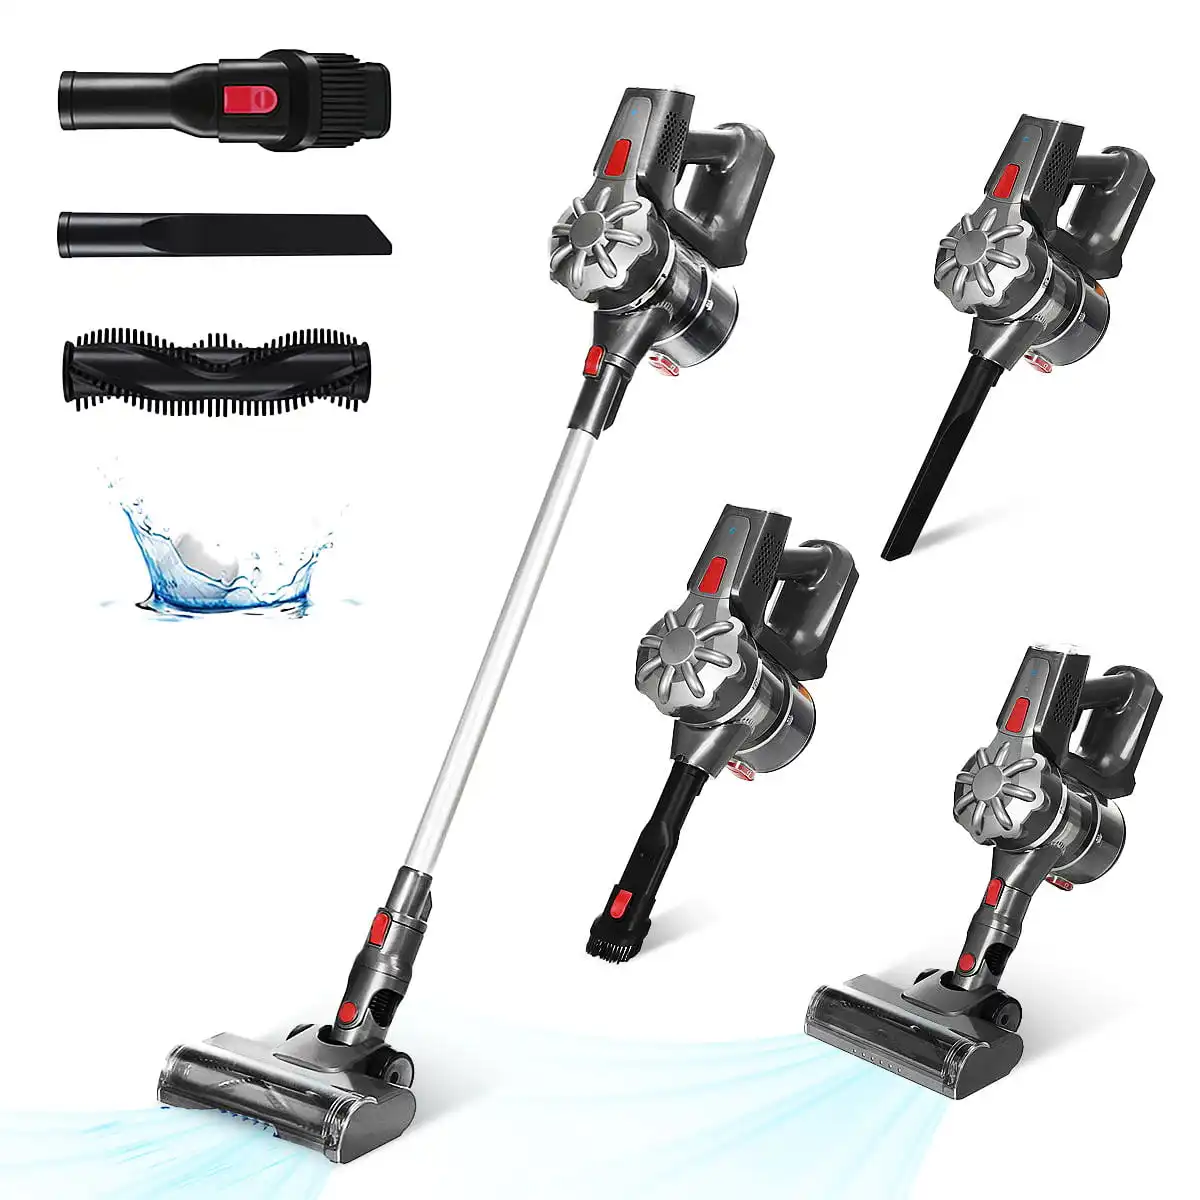 Proclean S107B Wholesale High Pressure The Best Vacuum Cleaner Price Cordless Portable 2 In 1 Floor Mop Cleaner Machine